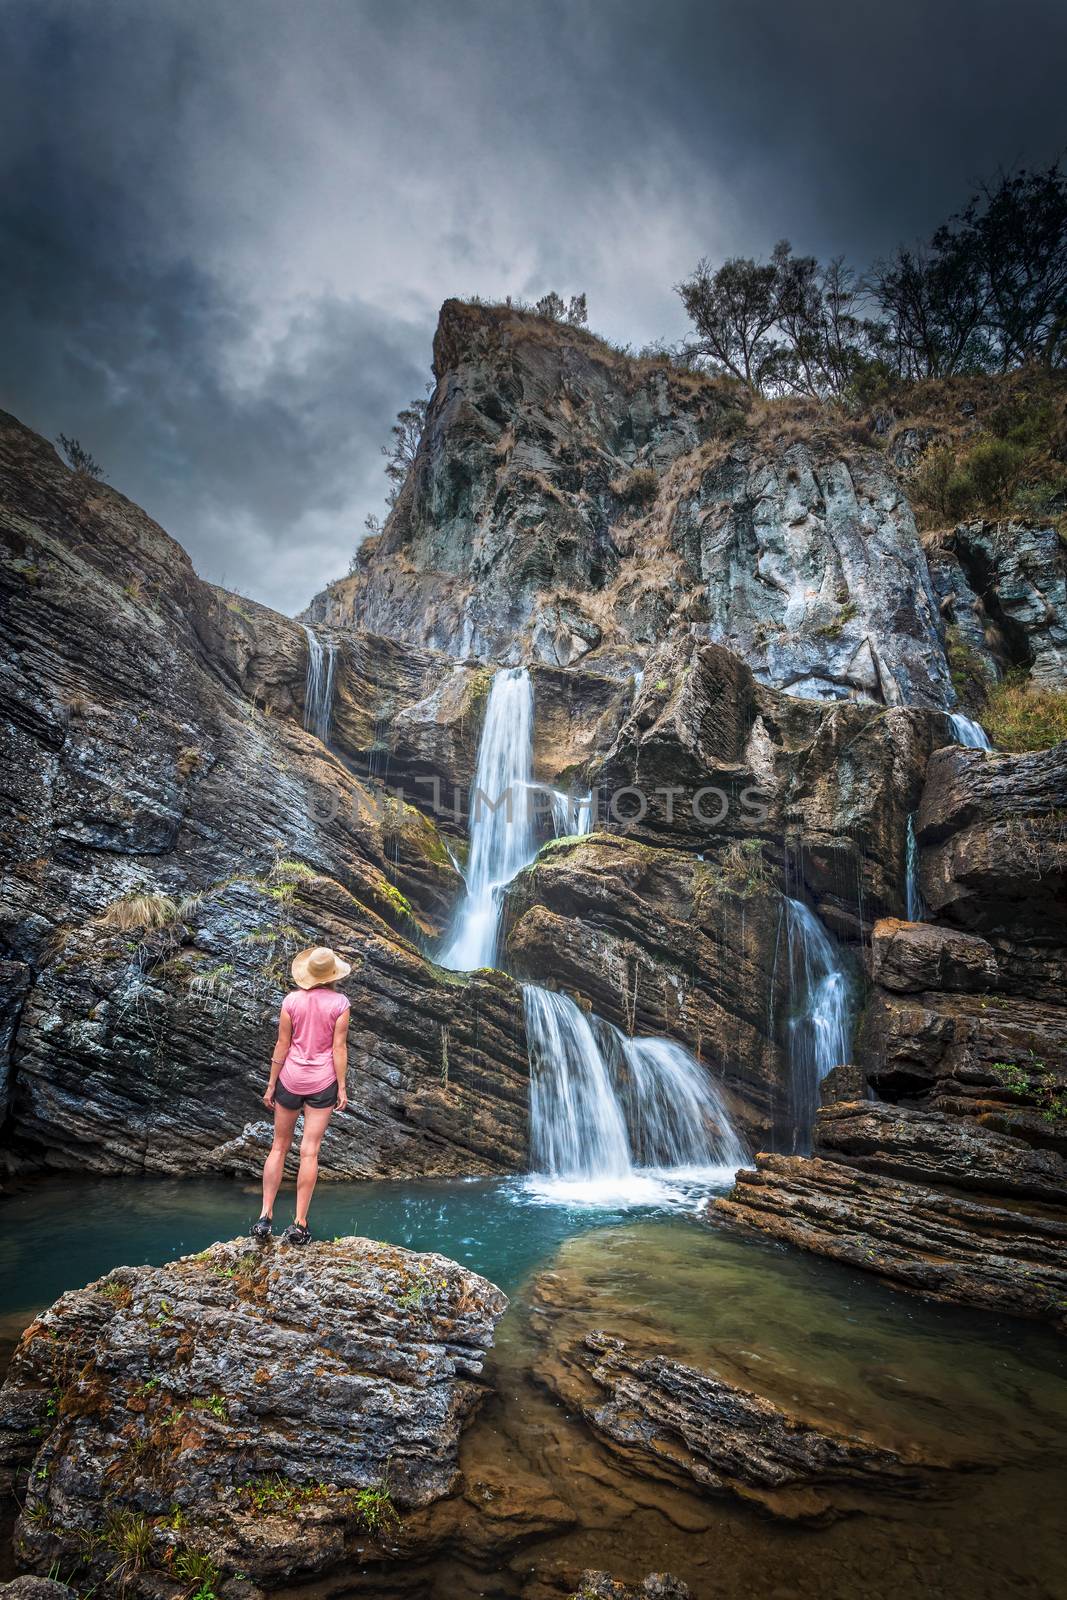 Waterfalls tumbling from over and within imposing rocky limestone gorge and caves flow into stunning blue swimming holes.  Moody weather of the Snowy Mountains rumbles overhead